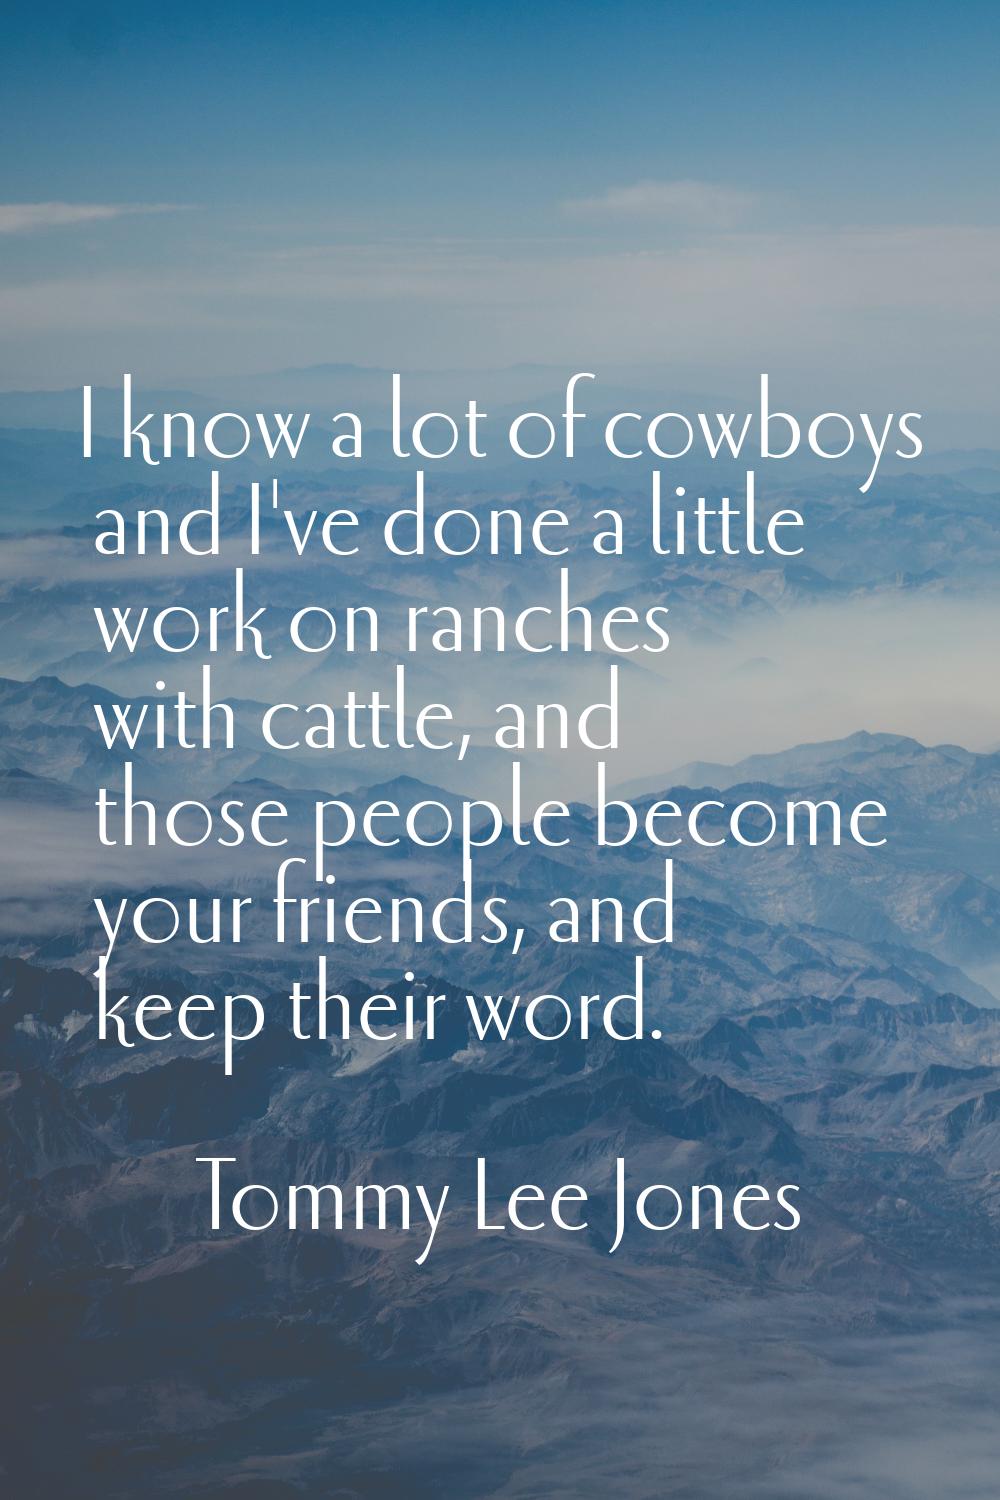 I know a lot of cowboys and I've done a little work on ranches with cattle, and those people become